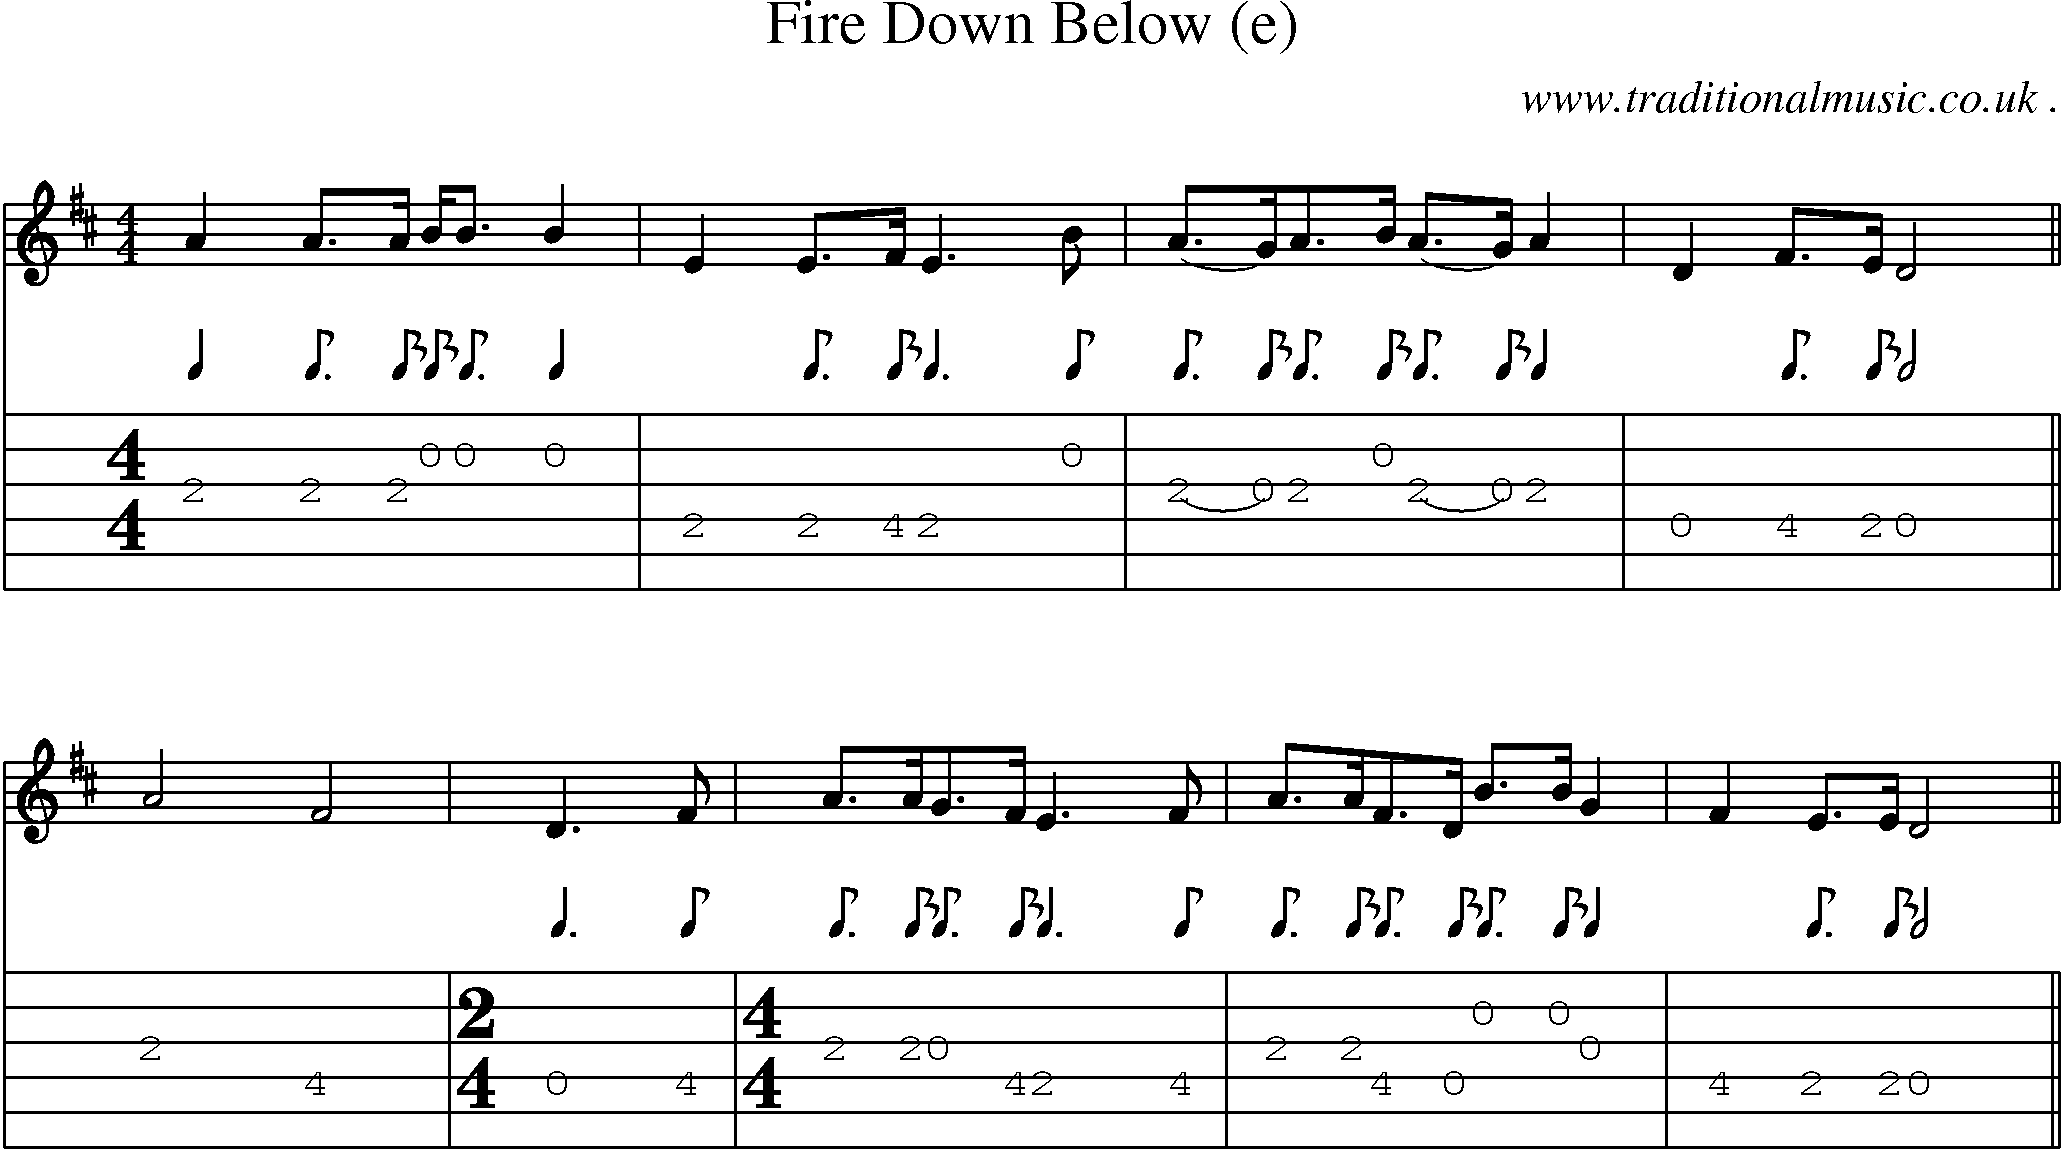 Sheet-Music and Guitar Tabs for Fire Down Below (e)